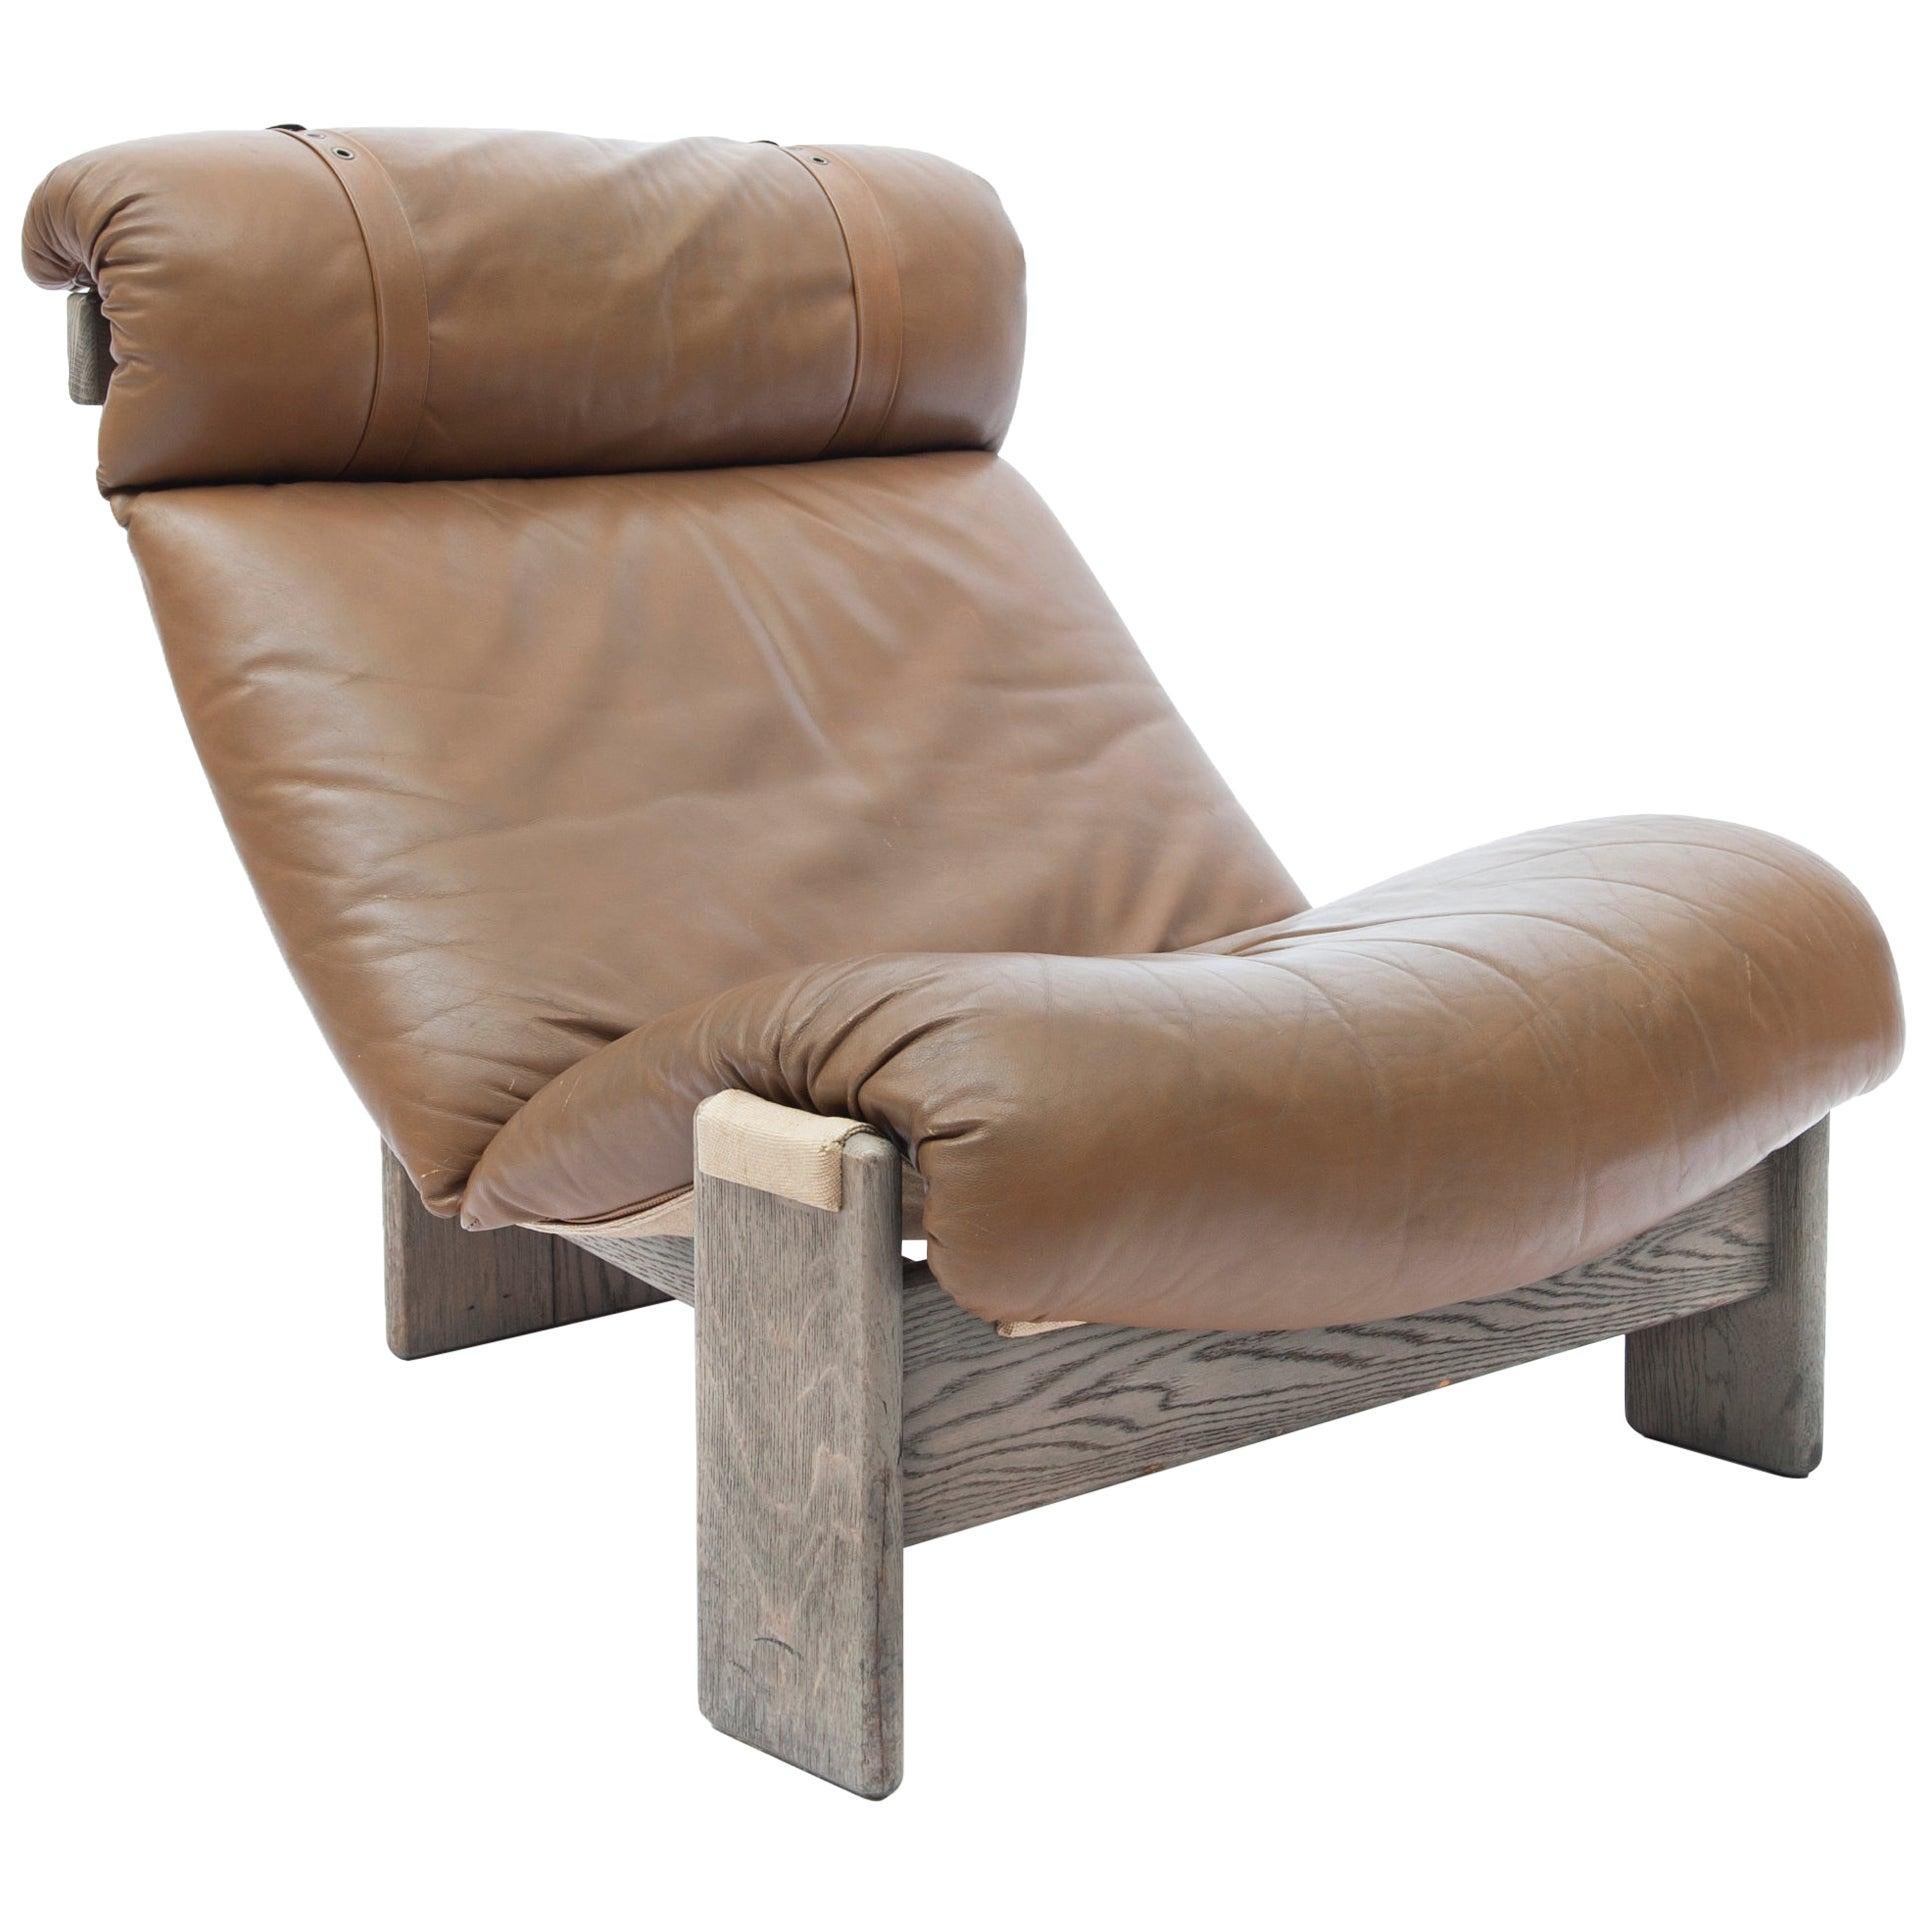 Tripod Lounge Chair in Oak, Leather and Canvas, 1970s at 1stDibs